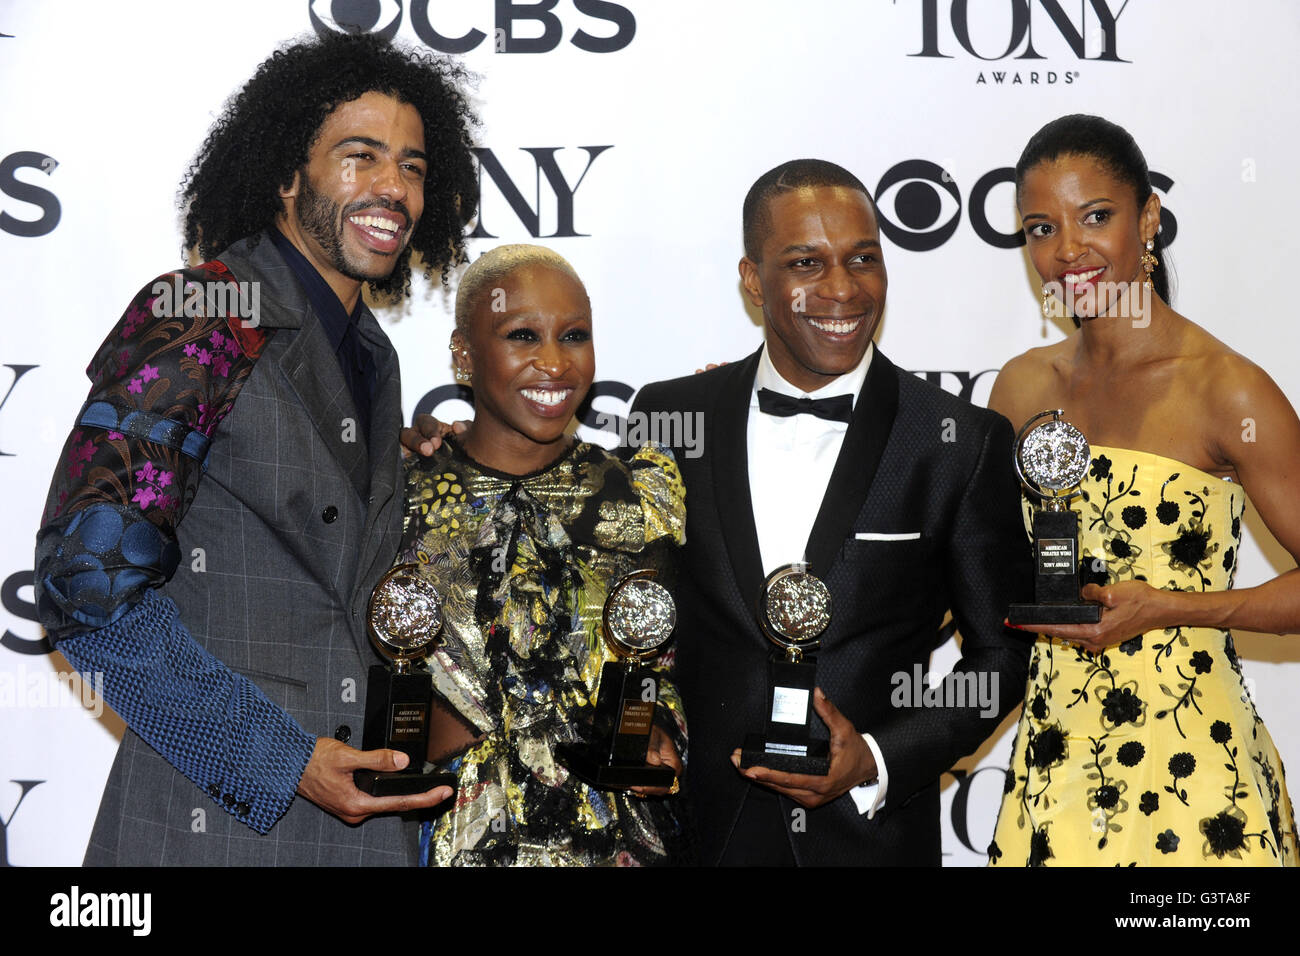 Daveed Digg, Cynthia Erivo, Leslie Odom Jr. and Renee Elise Goldsberry pose with their awards in the press room at the 70th Annual Tony Awards at Beacon Theatre on June 12, 2016 in New York City. | Verwendung weltweit Stock Photo